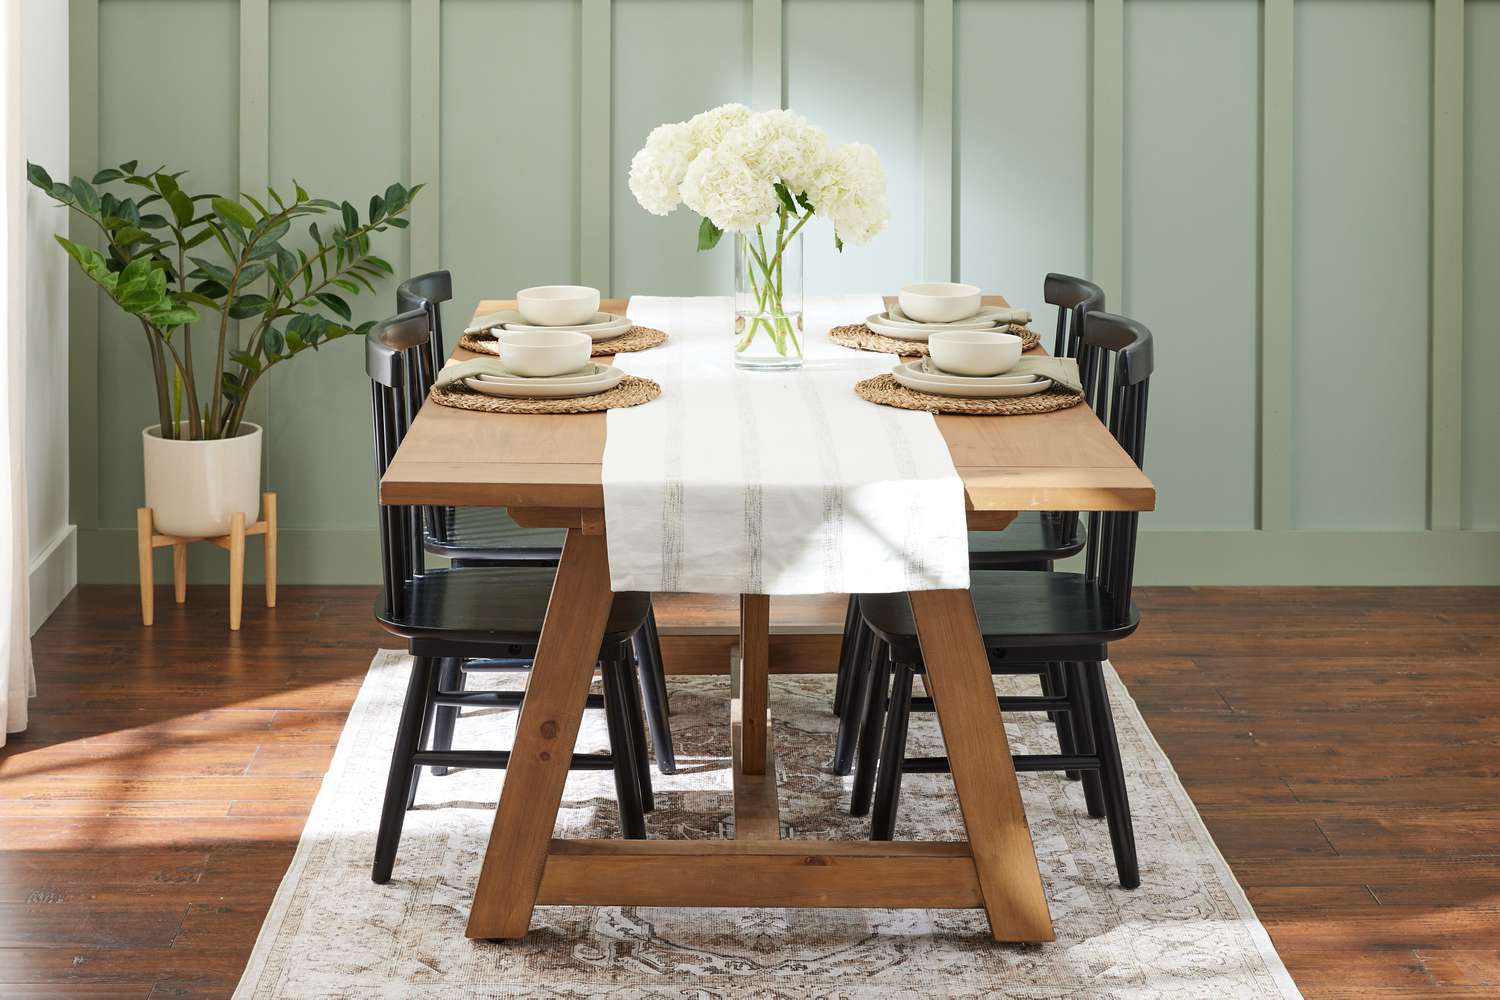 What Dining Table Should I Get?